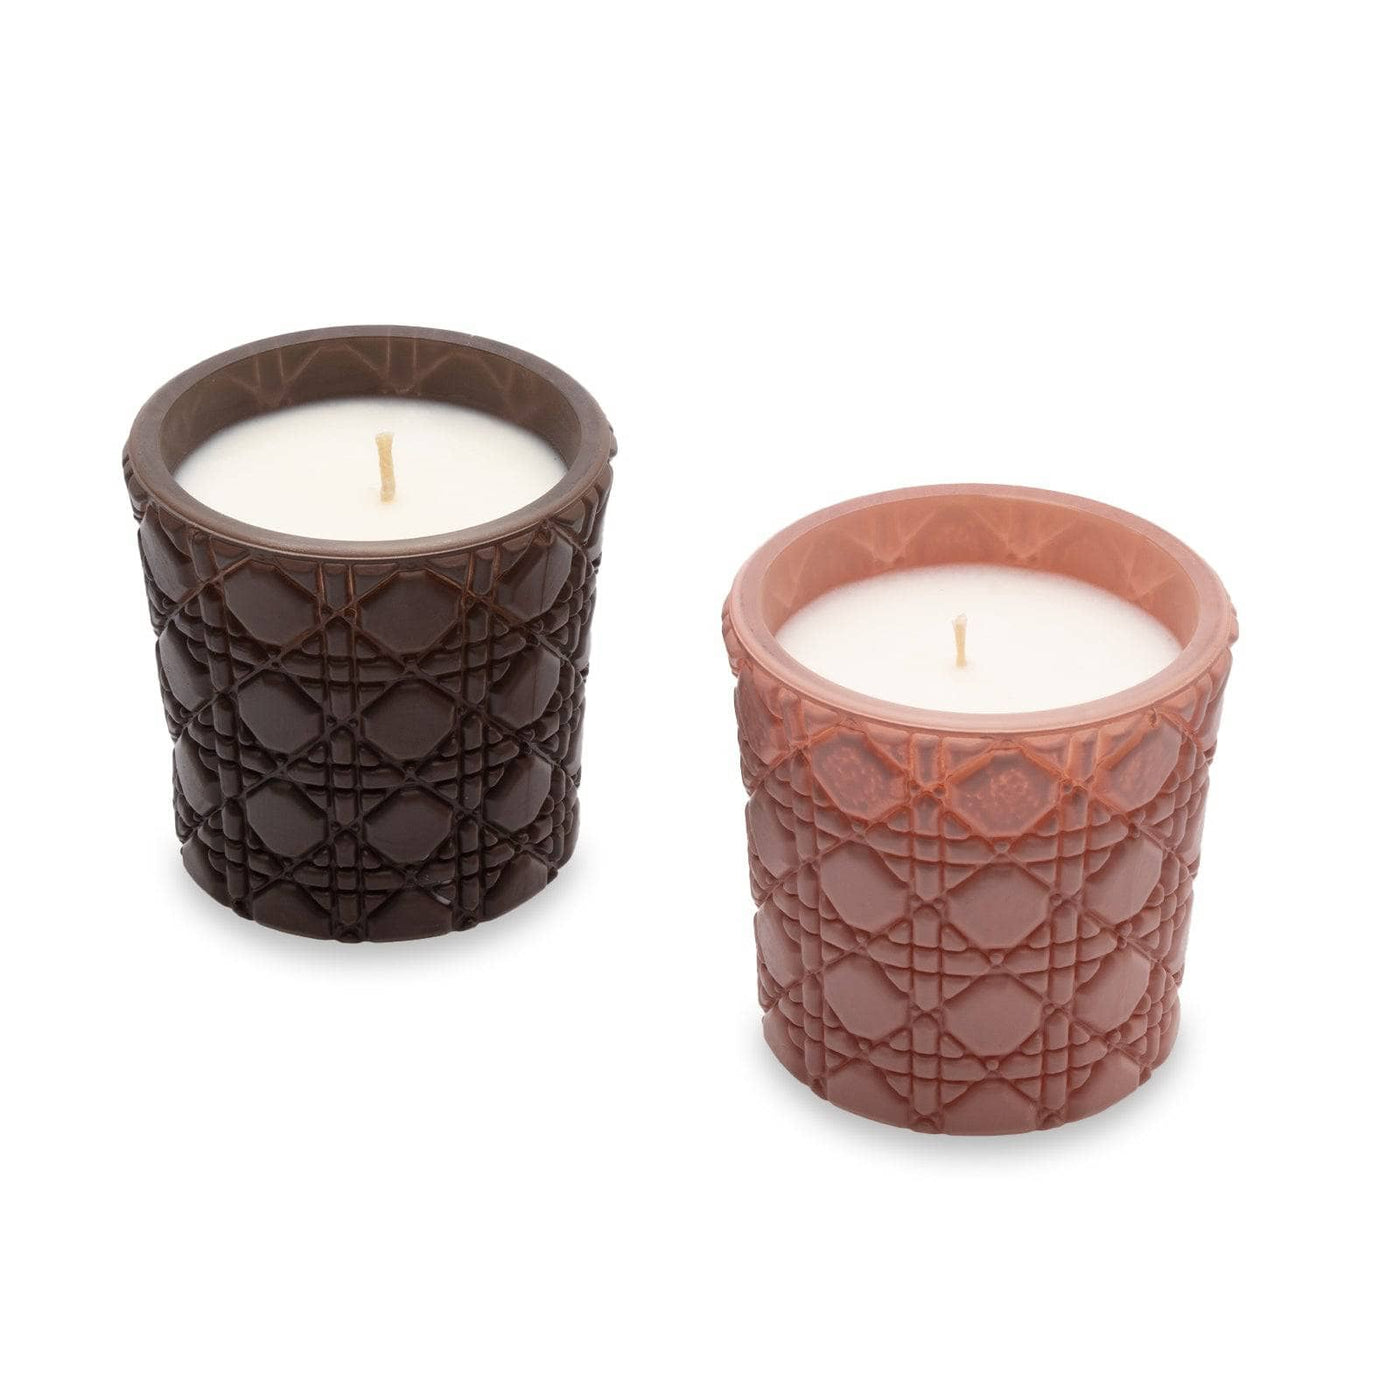 Mellowed Out and Re-energise Set of 2 Mini Soy Wax Candles, 145 g each Candles sazy.com